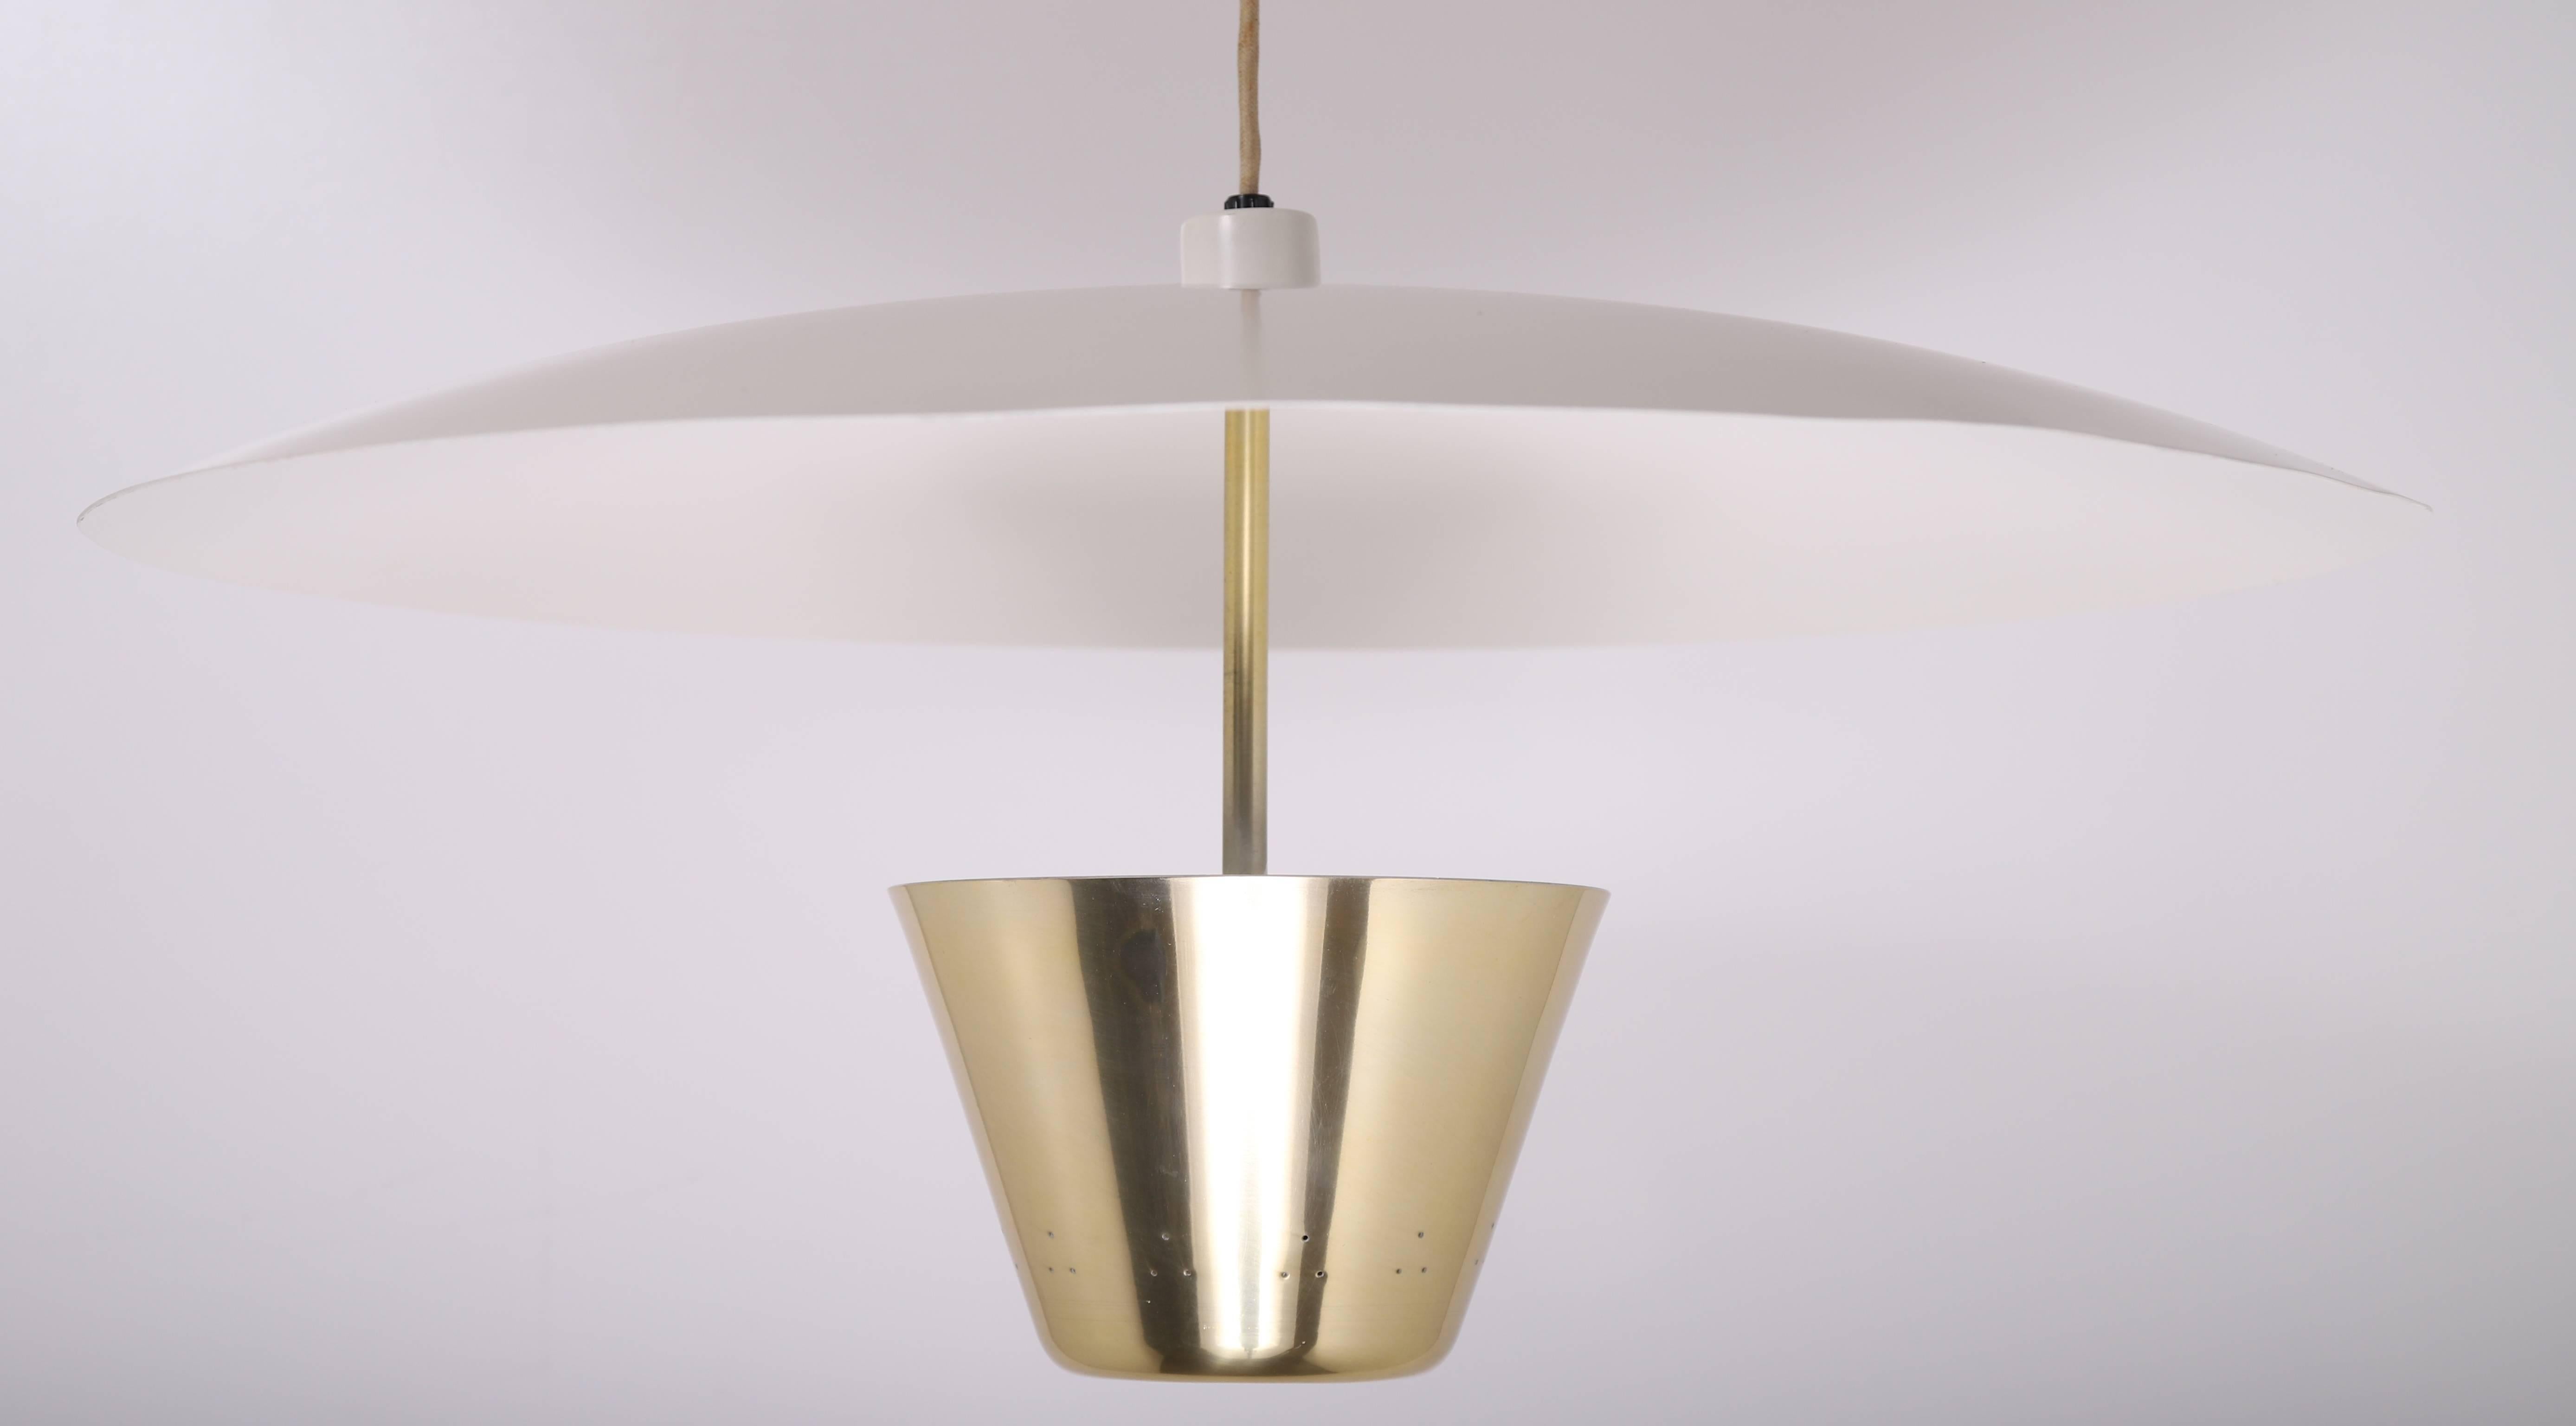 Mid-20th Century Saucer Pendant Light by Edward Wormley for Lightolier